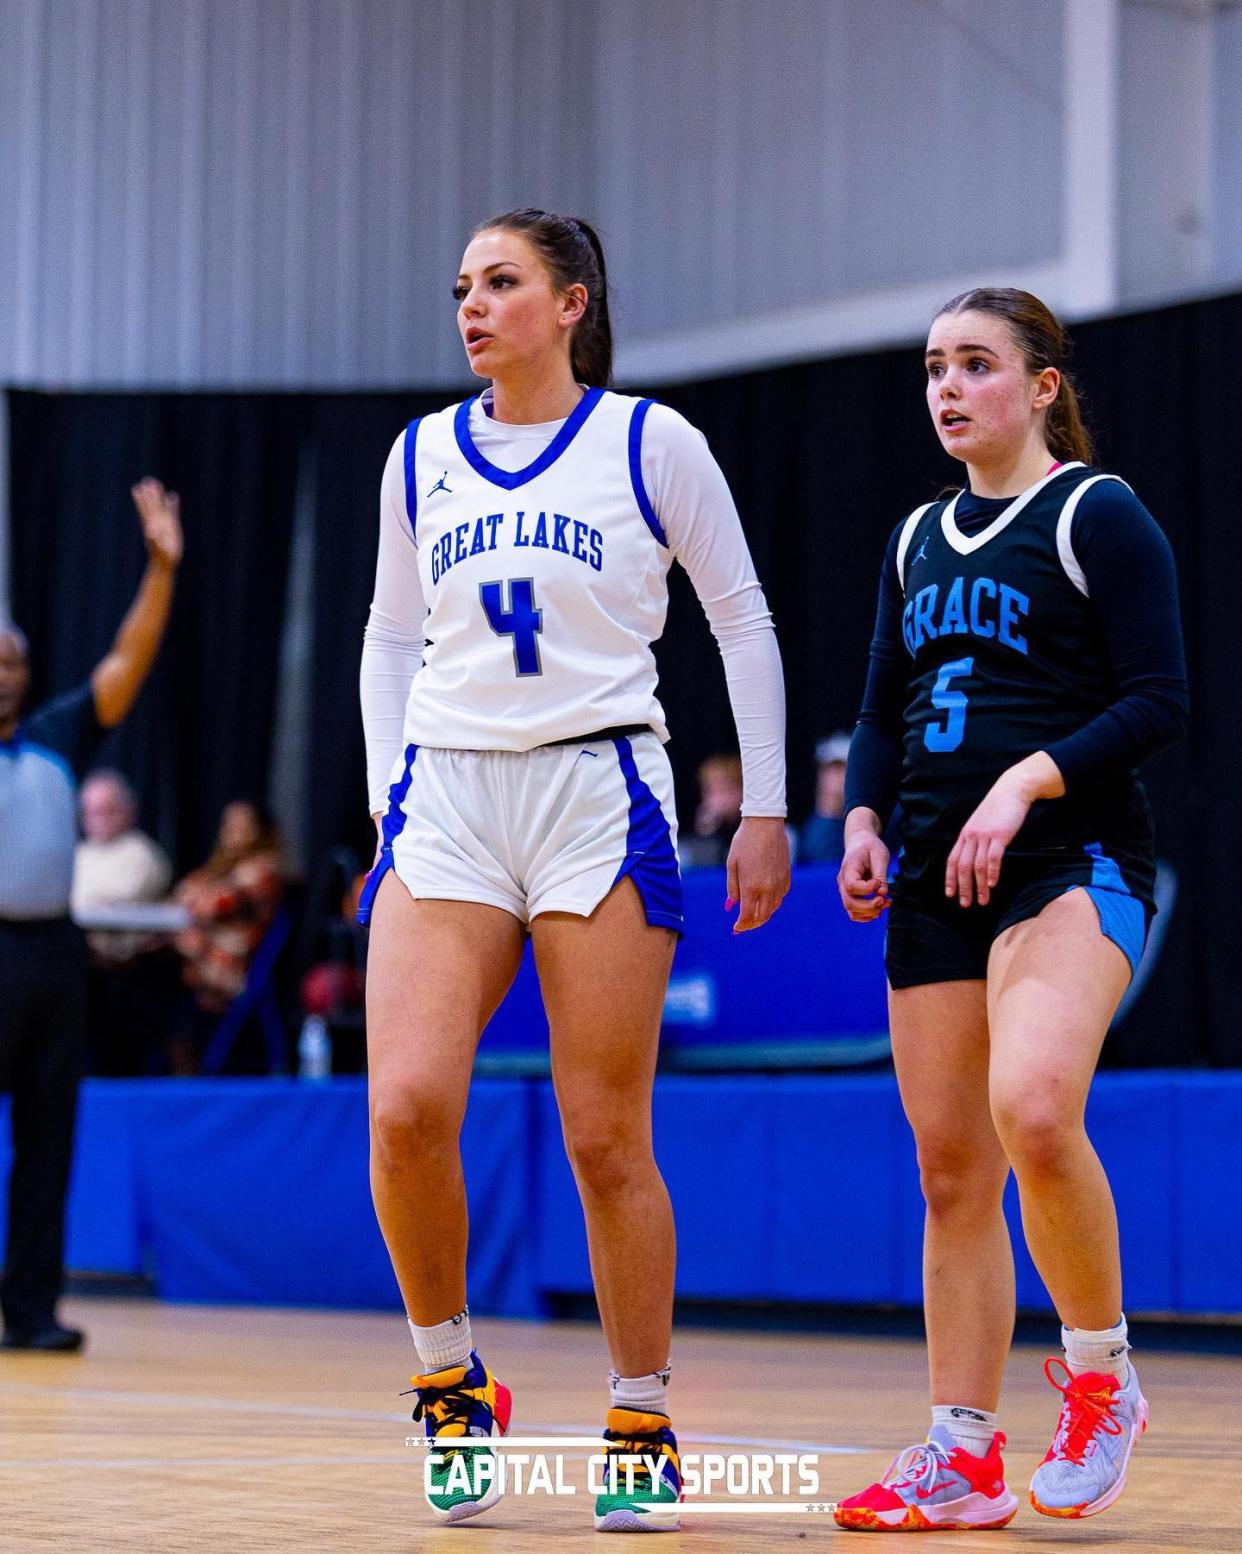 Devan Buda, a Lansing Catholic alum, has been a standout for Great Lakes Christian College this season, playing through the pain of a stress fracture in her left shin.